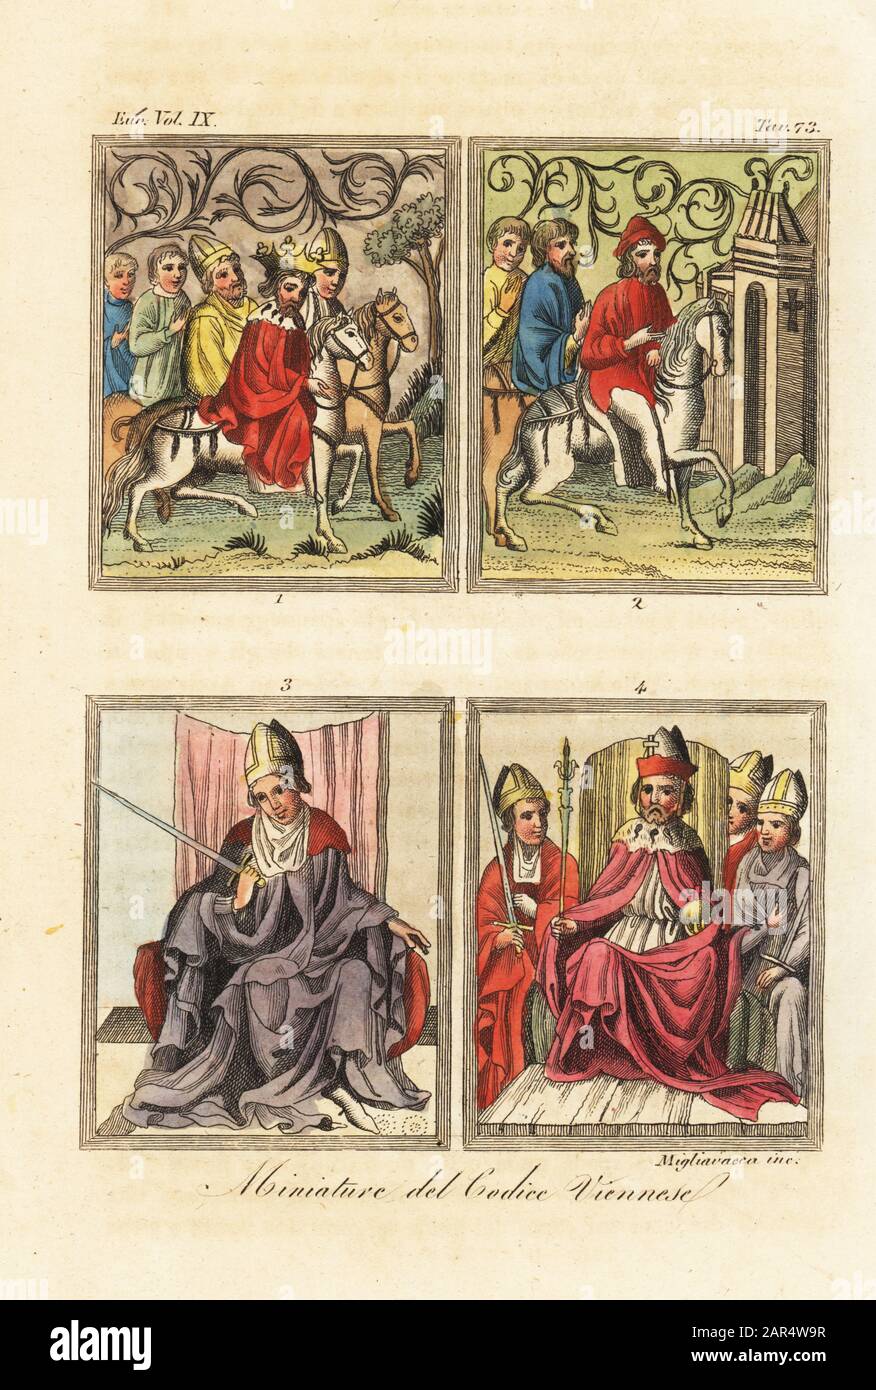 King Wenceslaus of Bohemia riding with the Archbishop of Mainz, the Bishops of Bamberg and Wurtzburg and the Burgraves of Nuremberg 1; citizens of Frankfurt on horseback 2; the Archbishop of Mainz 3, and Holy Roman Emperor Charles IV on his throne with sceptre and orb with the Archbishops of Trier, Cologne and Mainz 4. Miniatures from the Vienna Codex of the Golden Bull, an illuminated manuscript prepared for King Wenceslaus IV of Bohemia, 1365. Handcoloured copperplate engraving by Migliavacca from Giulio Ferrario’s Costumes Ancient and Modern of the Peoples of the World, Il Costume Antico e Stock Photo